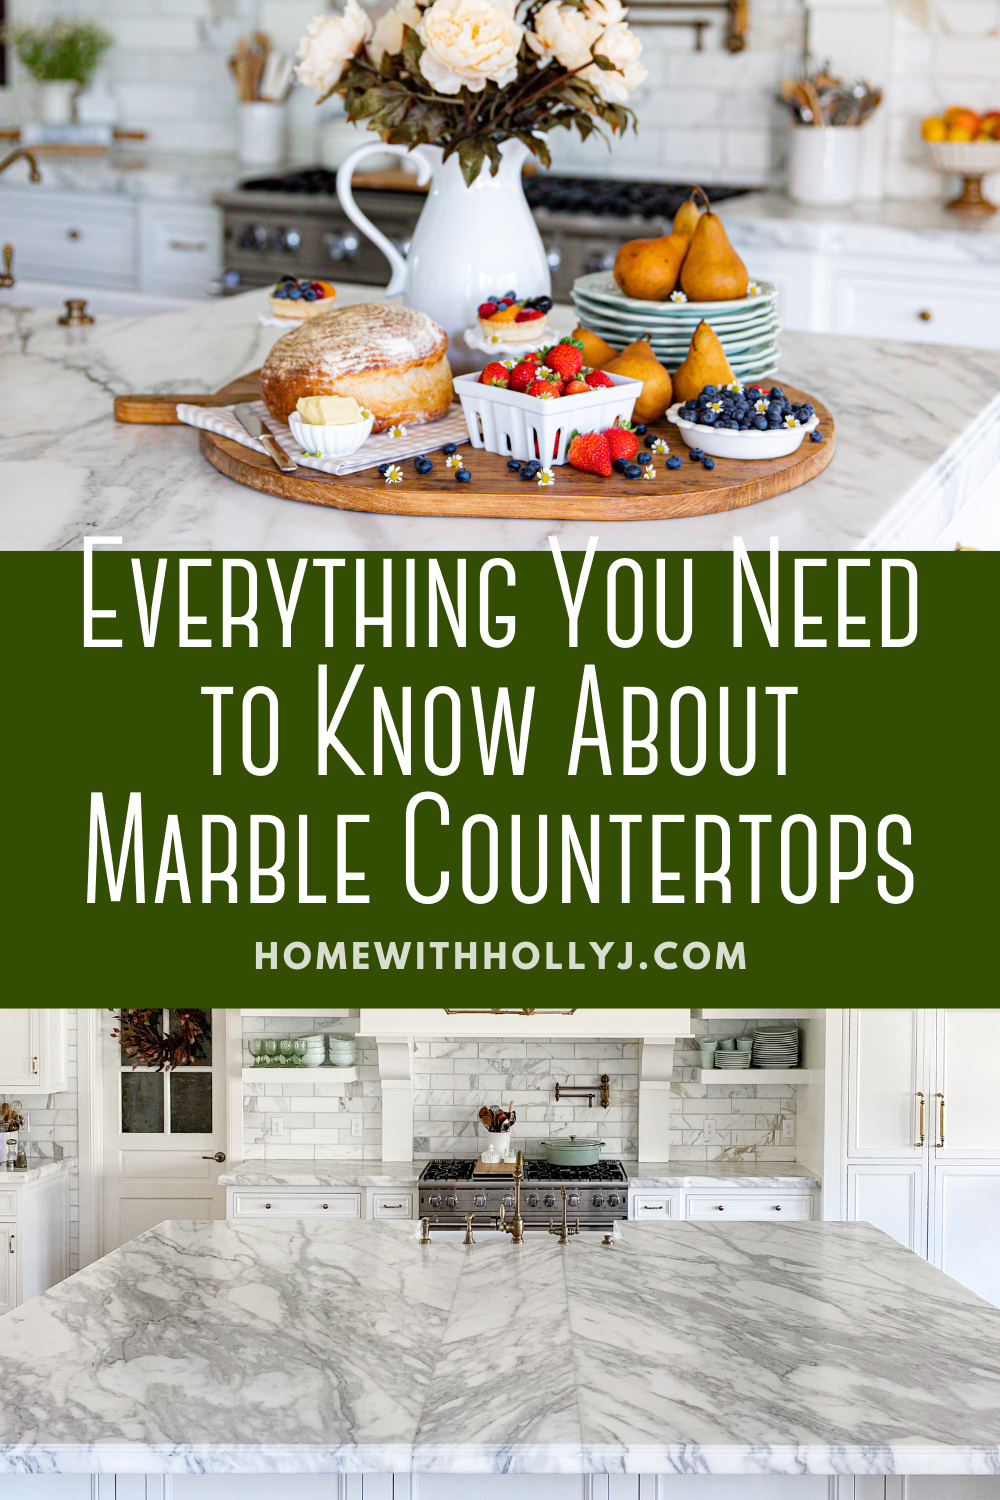 Sharing the pros and cons about marble countertops in the kitchen including how to clean them and take care of them.